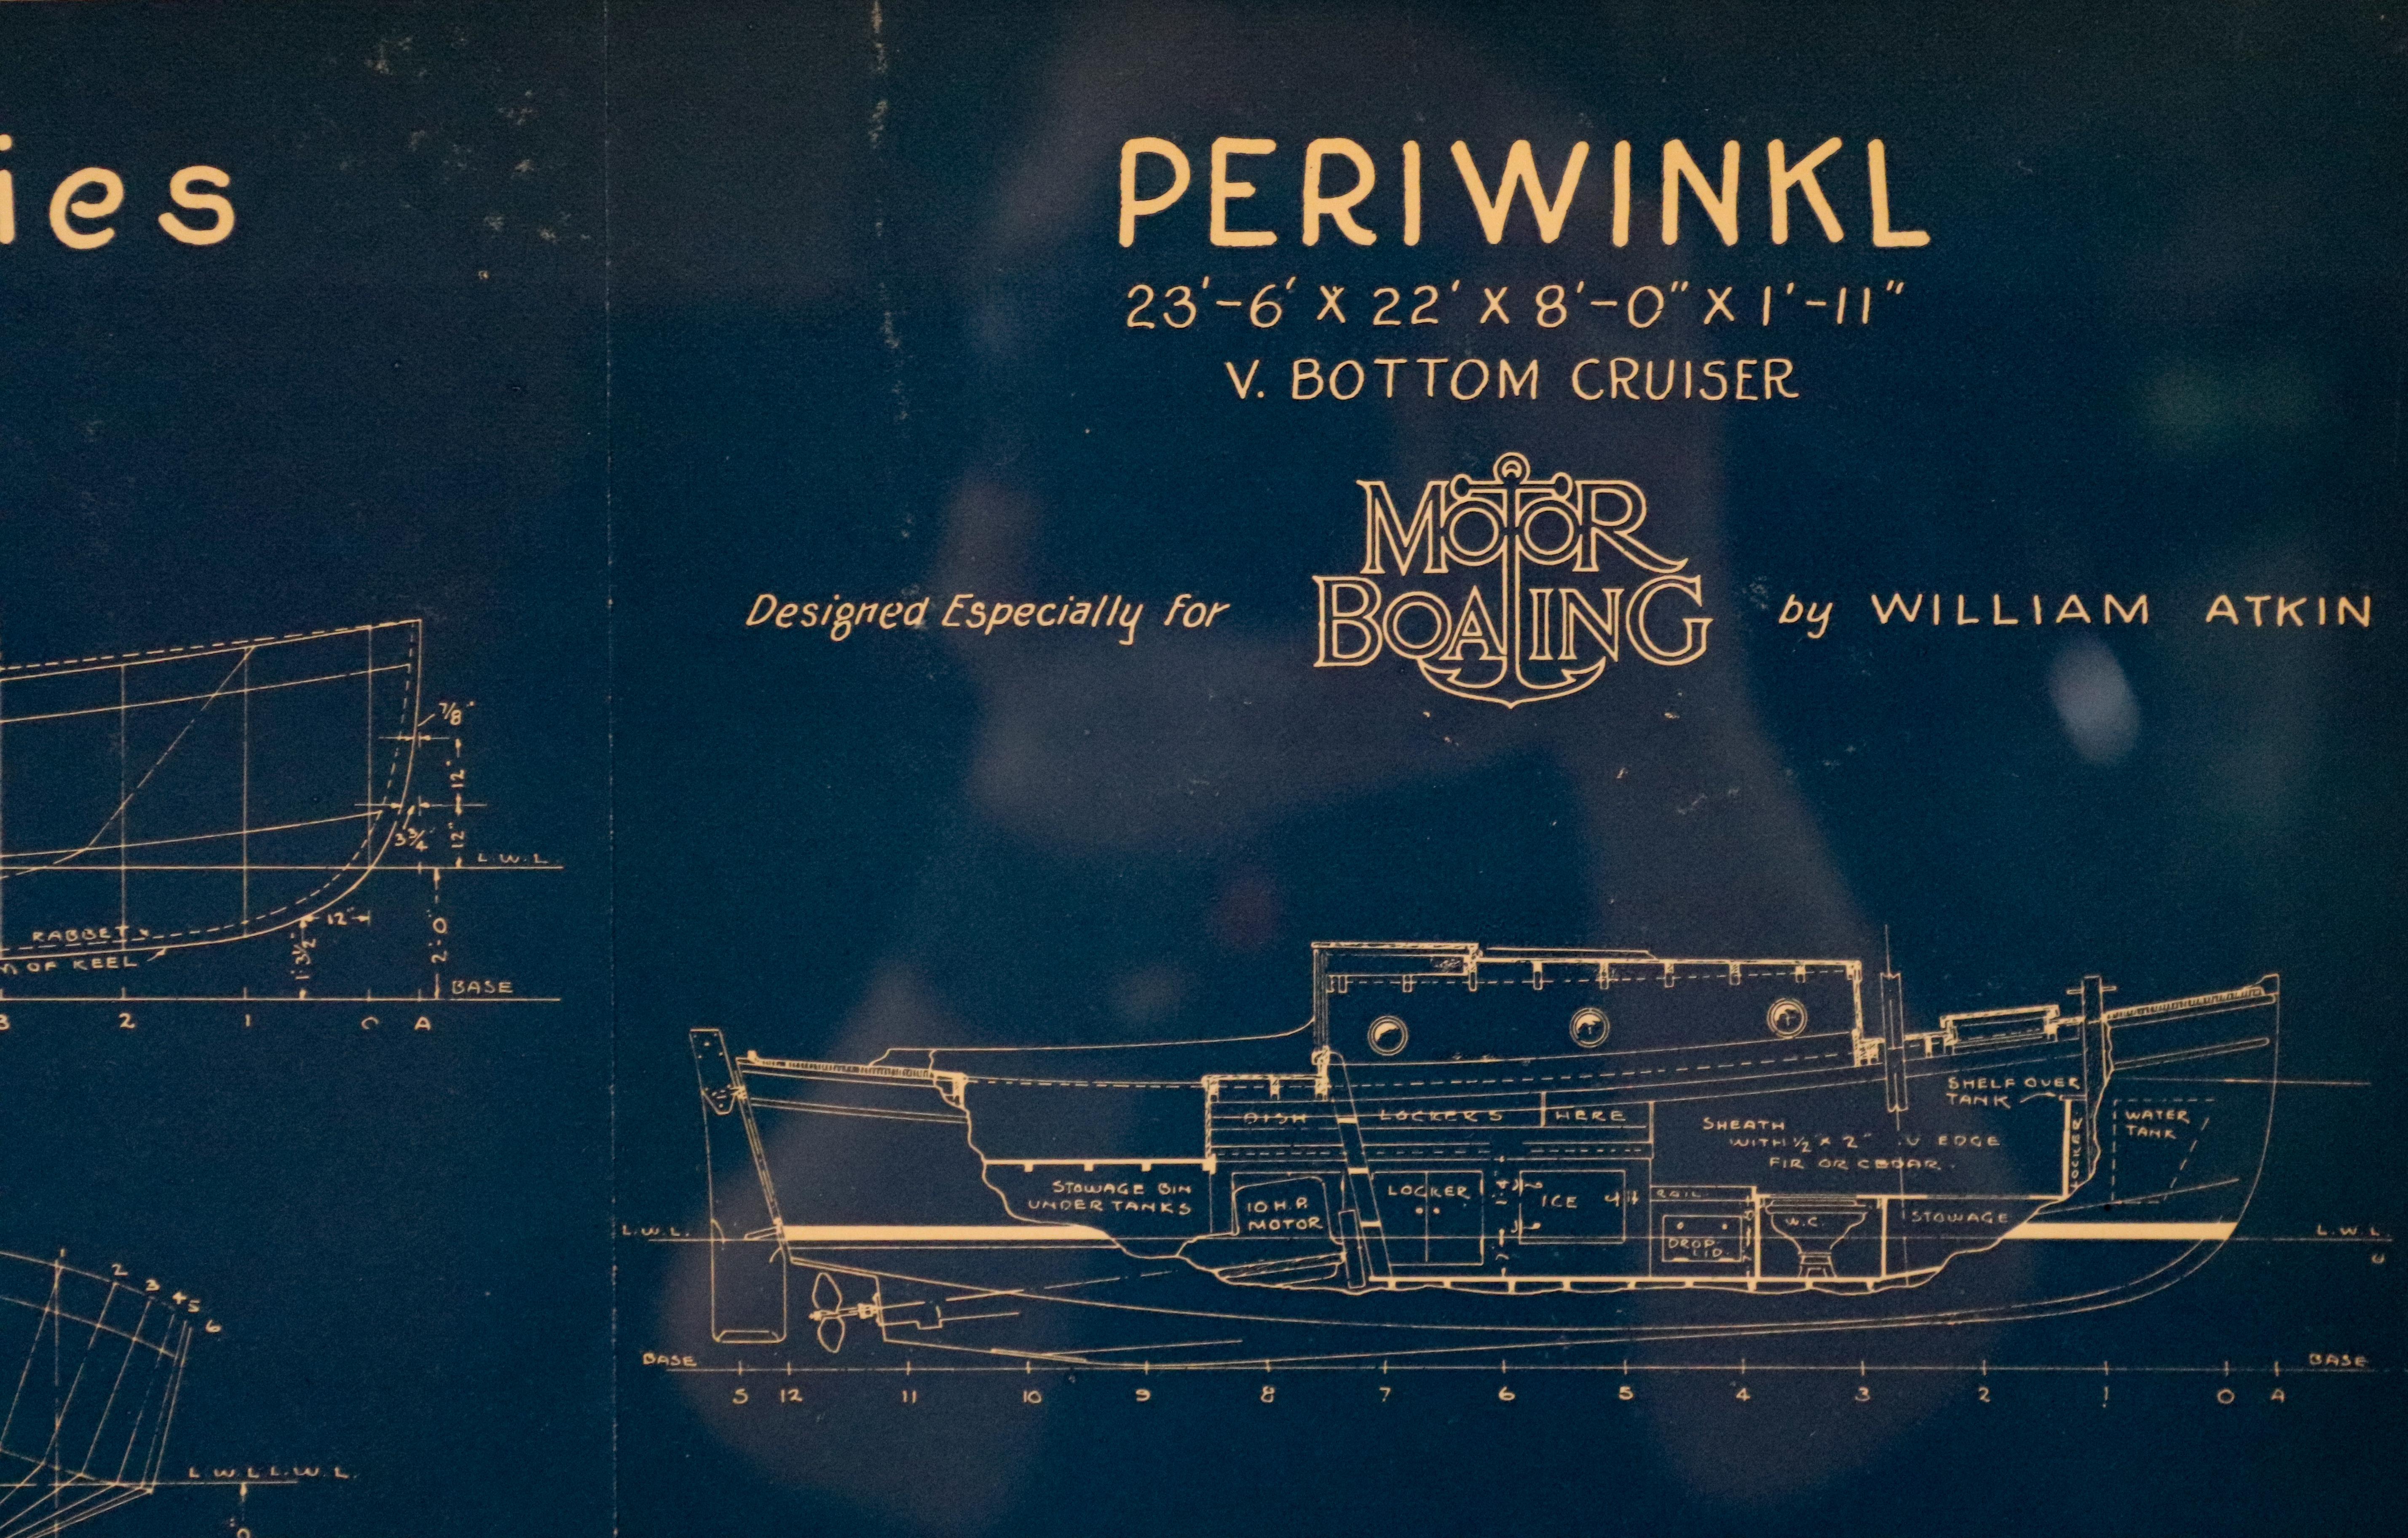 Original blueprint of a 23-foot V bottom cruiser drawn by William Atkin and published by Motor Boating Magazine's 